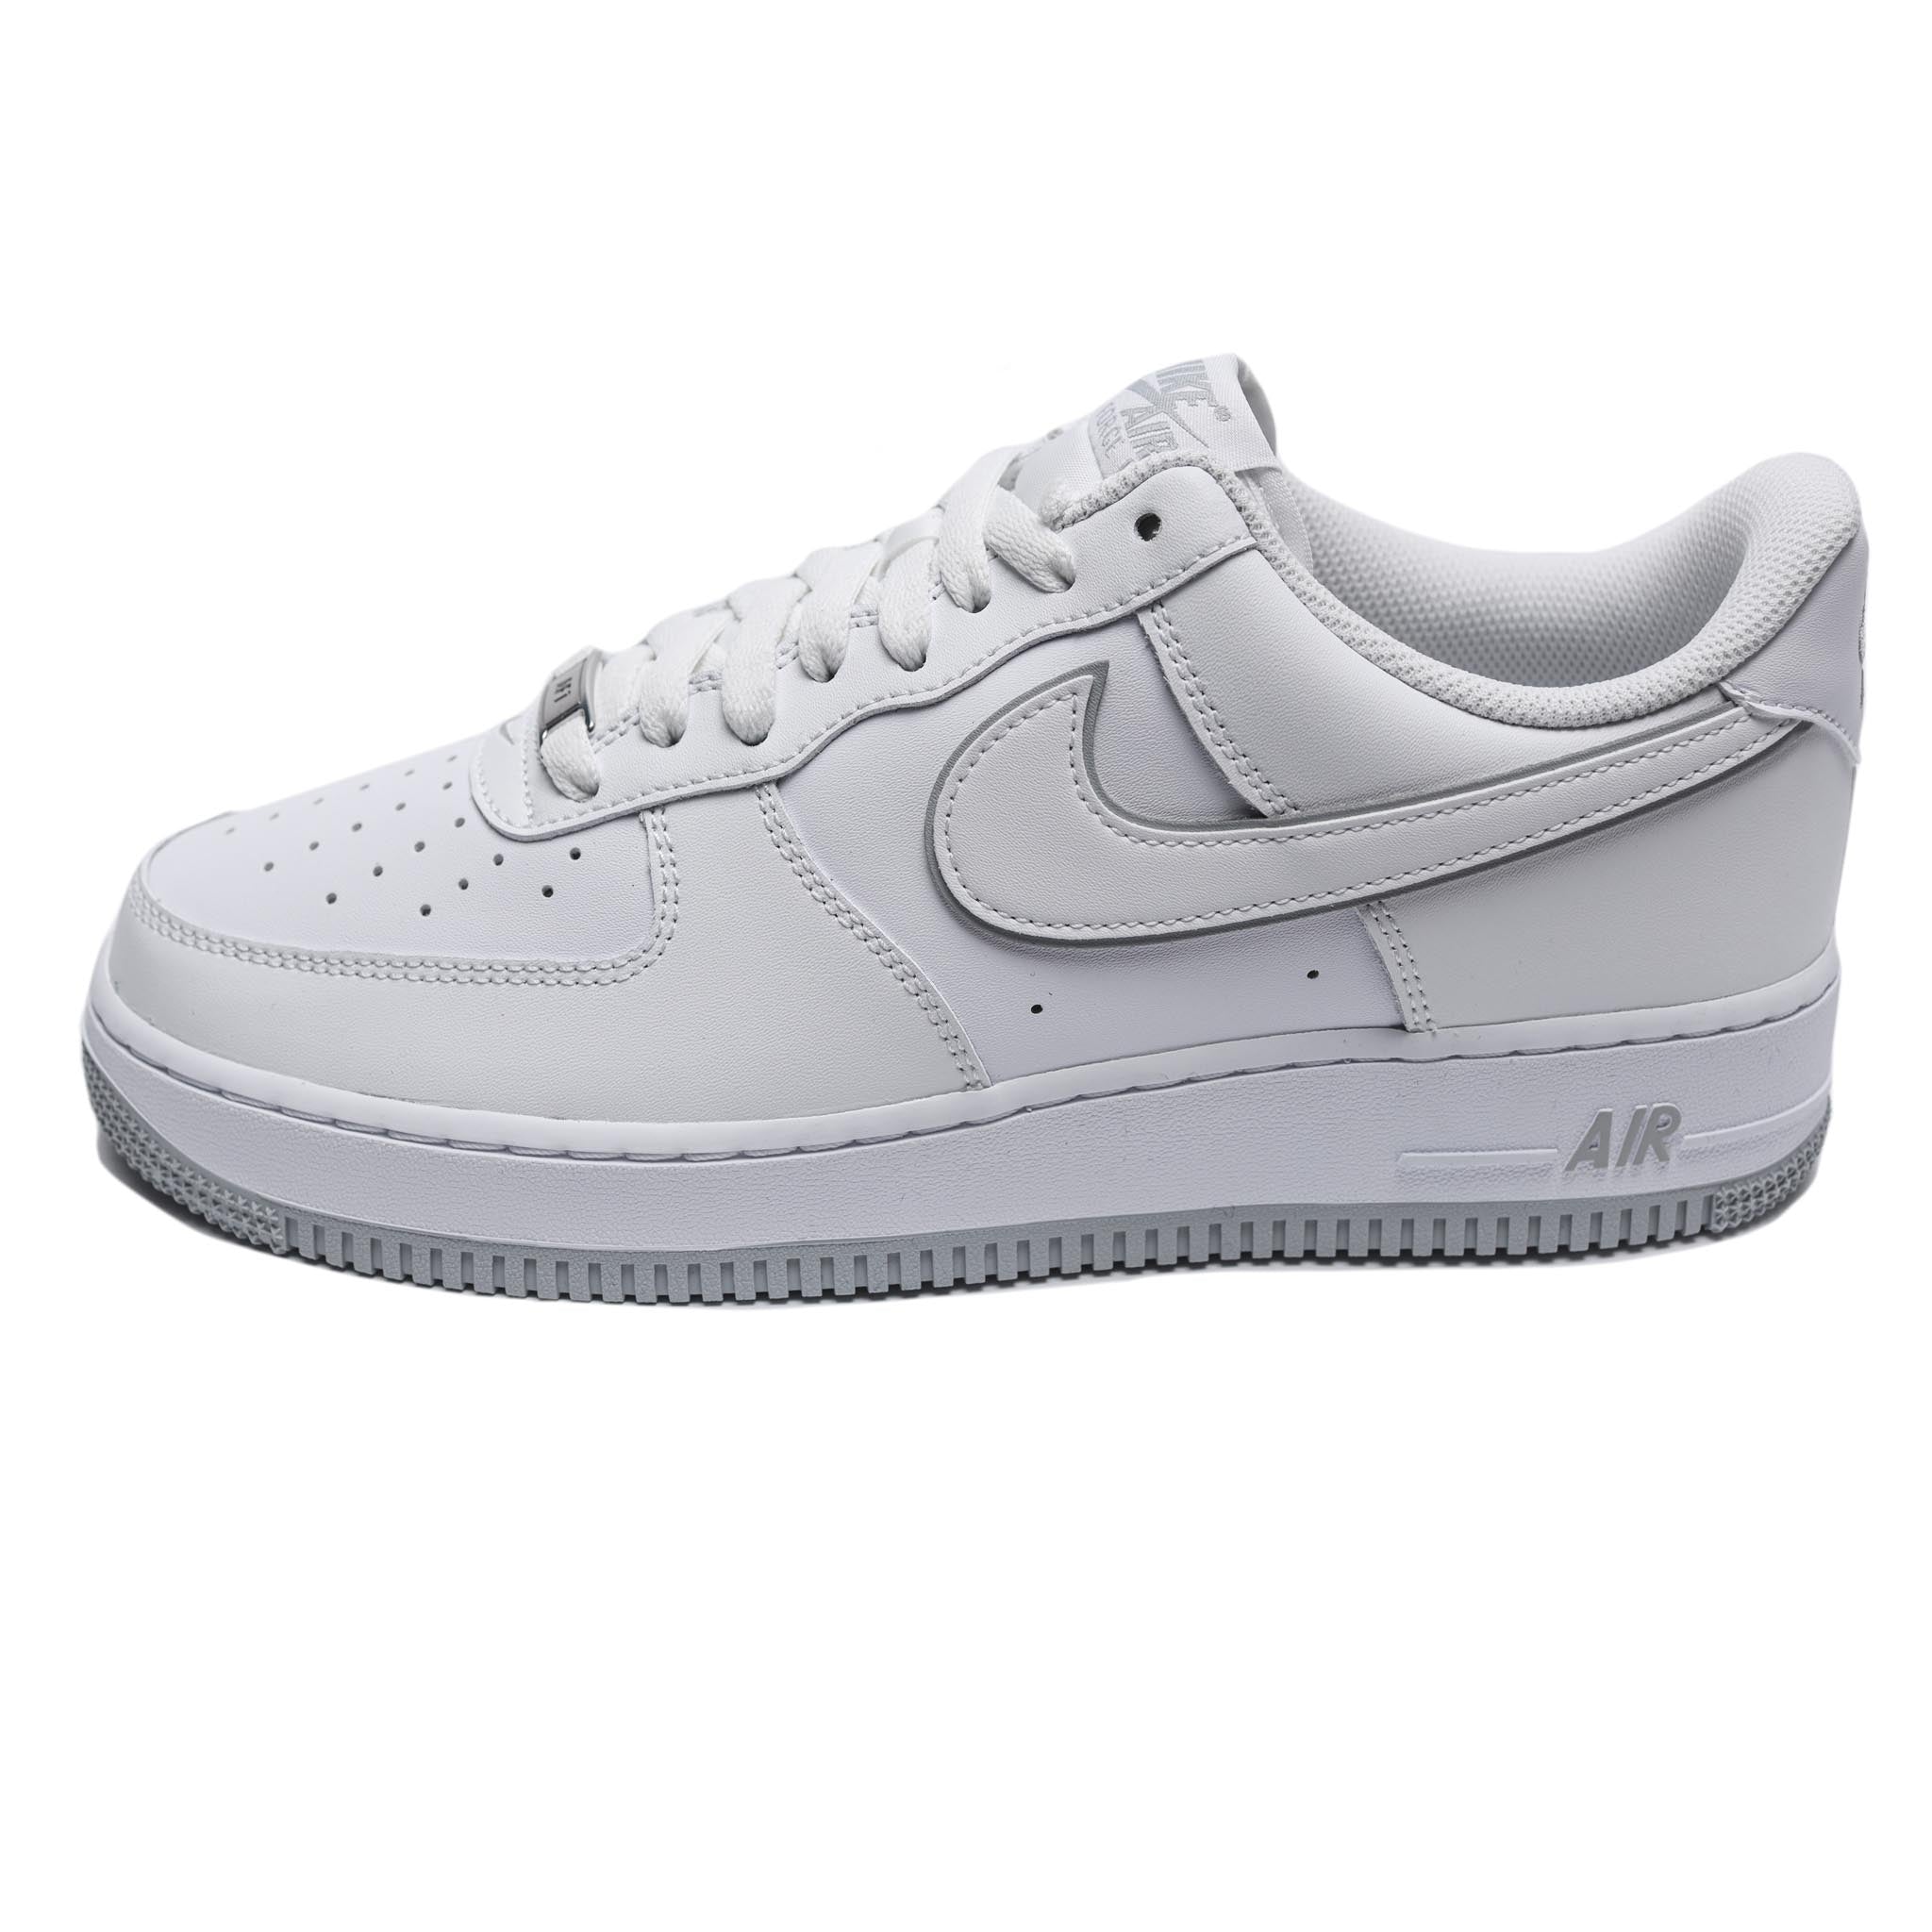 Nike Air Force 1 Mid '07 Wolf Grey/ Wolf Grey-white in Gray for